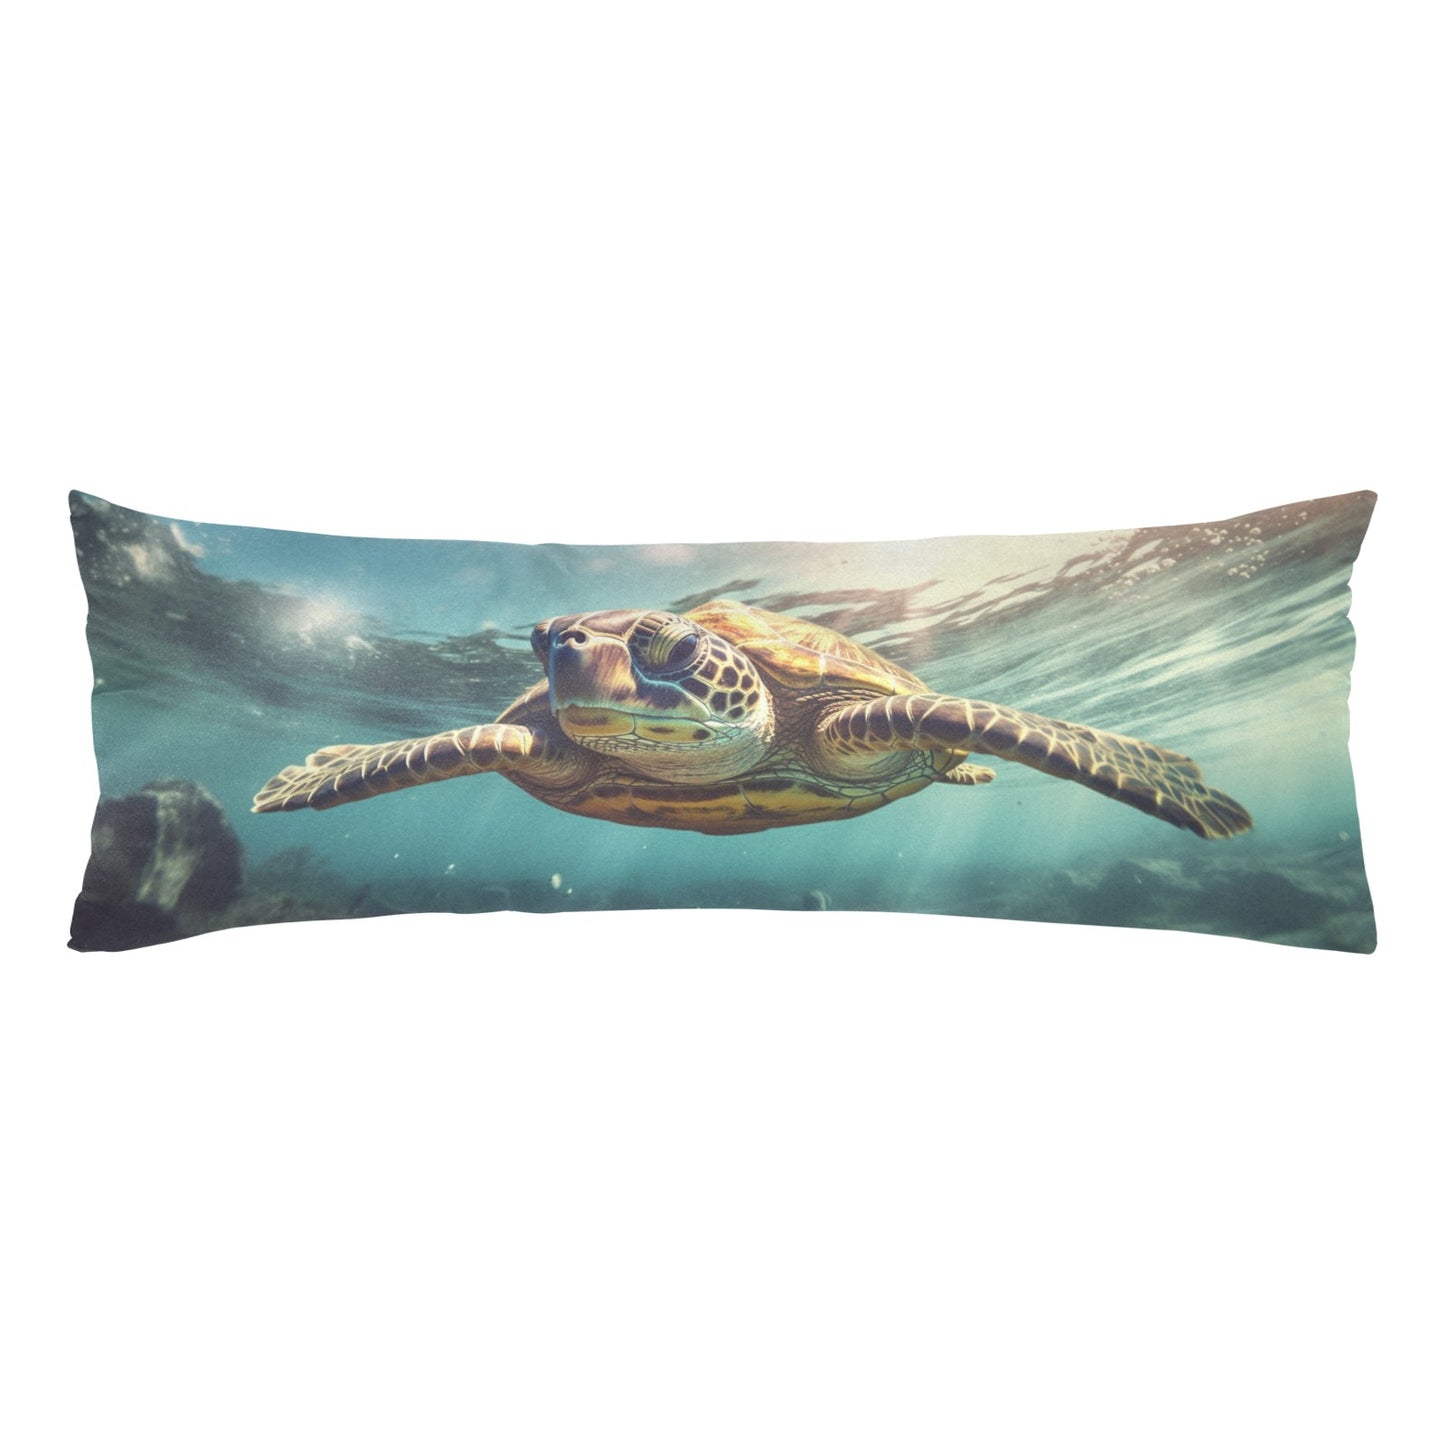 Sea Turtle Body Pillow Case, Ocean Underwater Long Full Large Bed Accent Print Throw Decor Decorative Cover 20x54 Satin Starcove Fashion